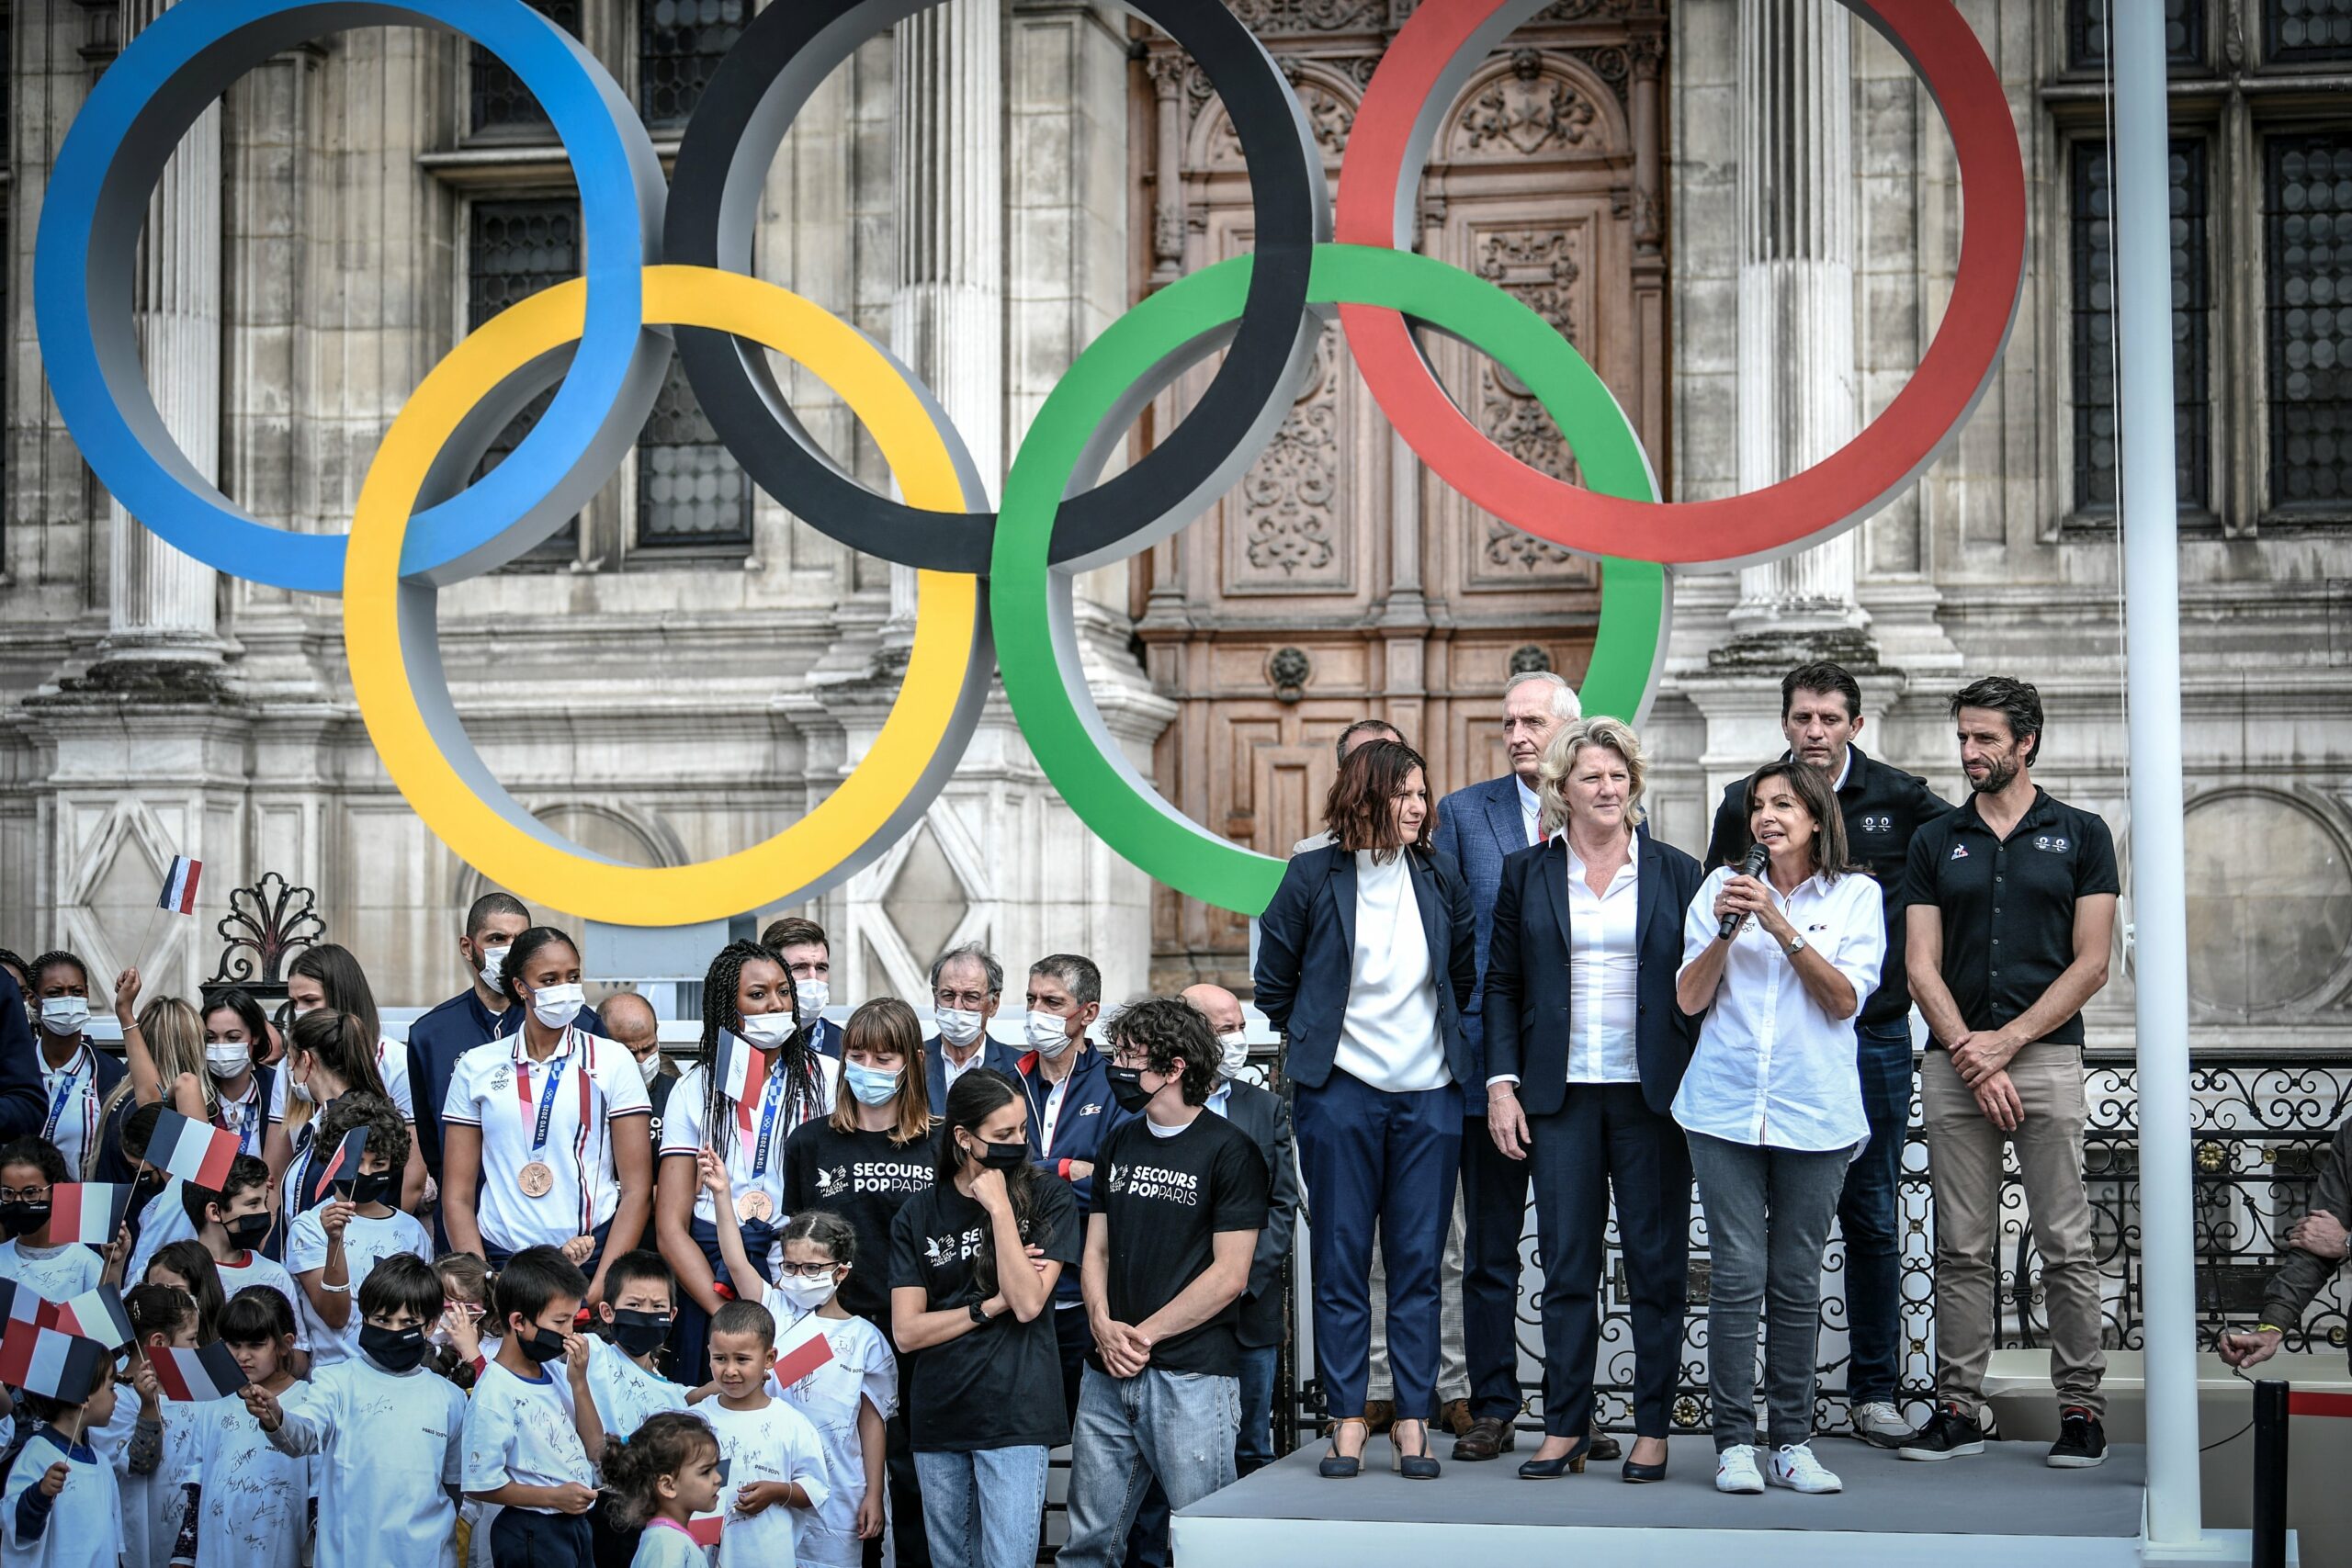 Let the games begin: Five layers of intelligence you need to triumph at Paris 2024